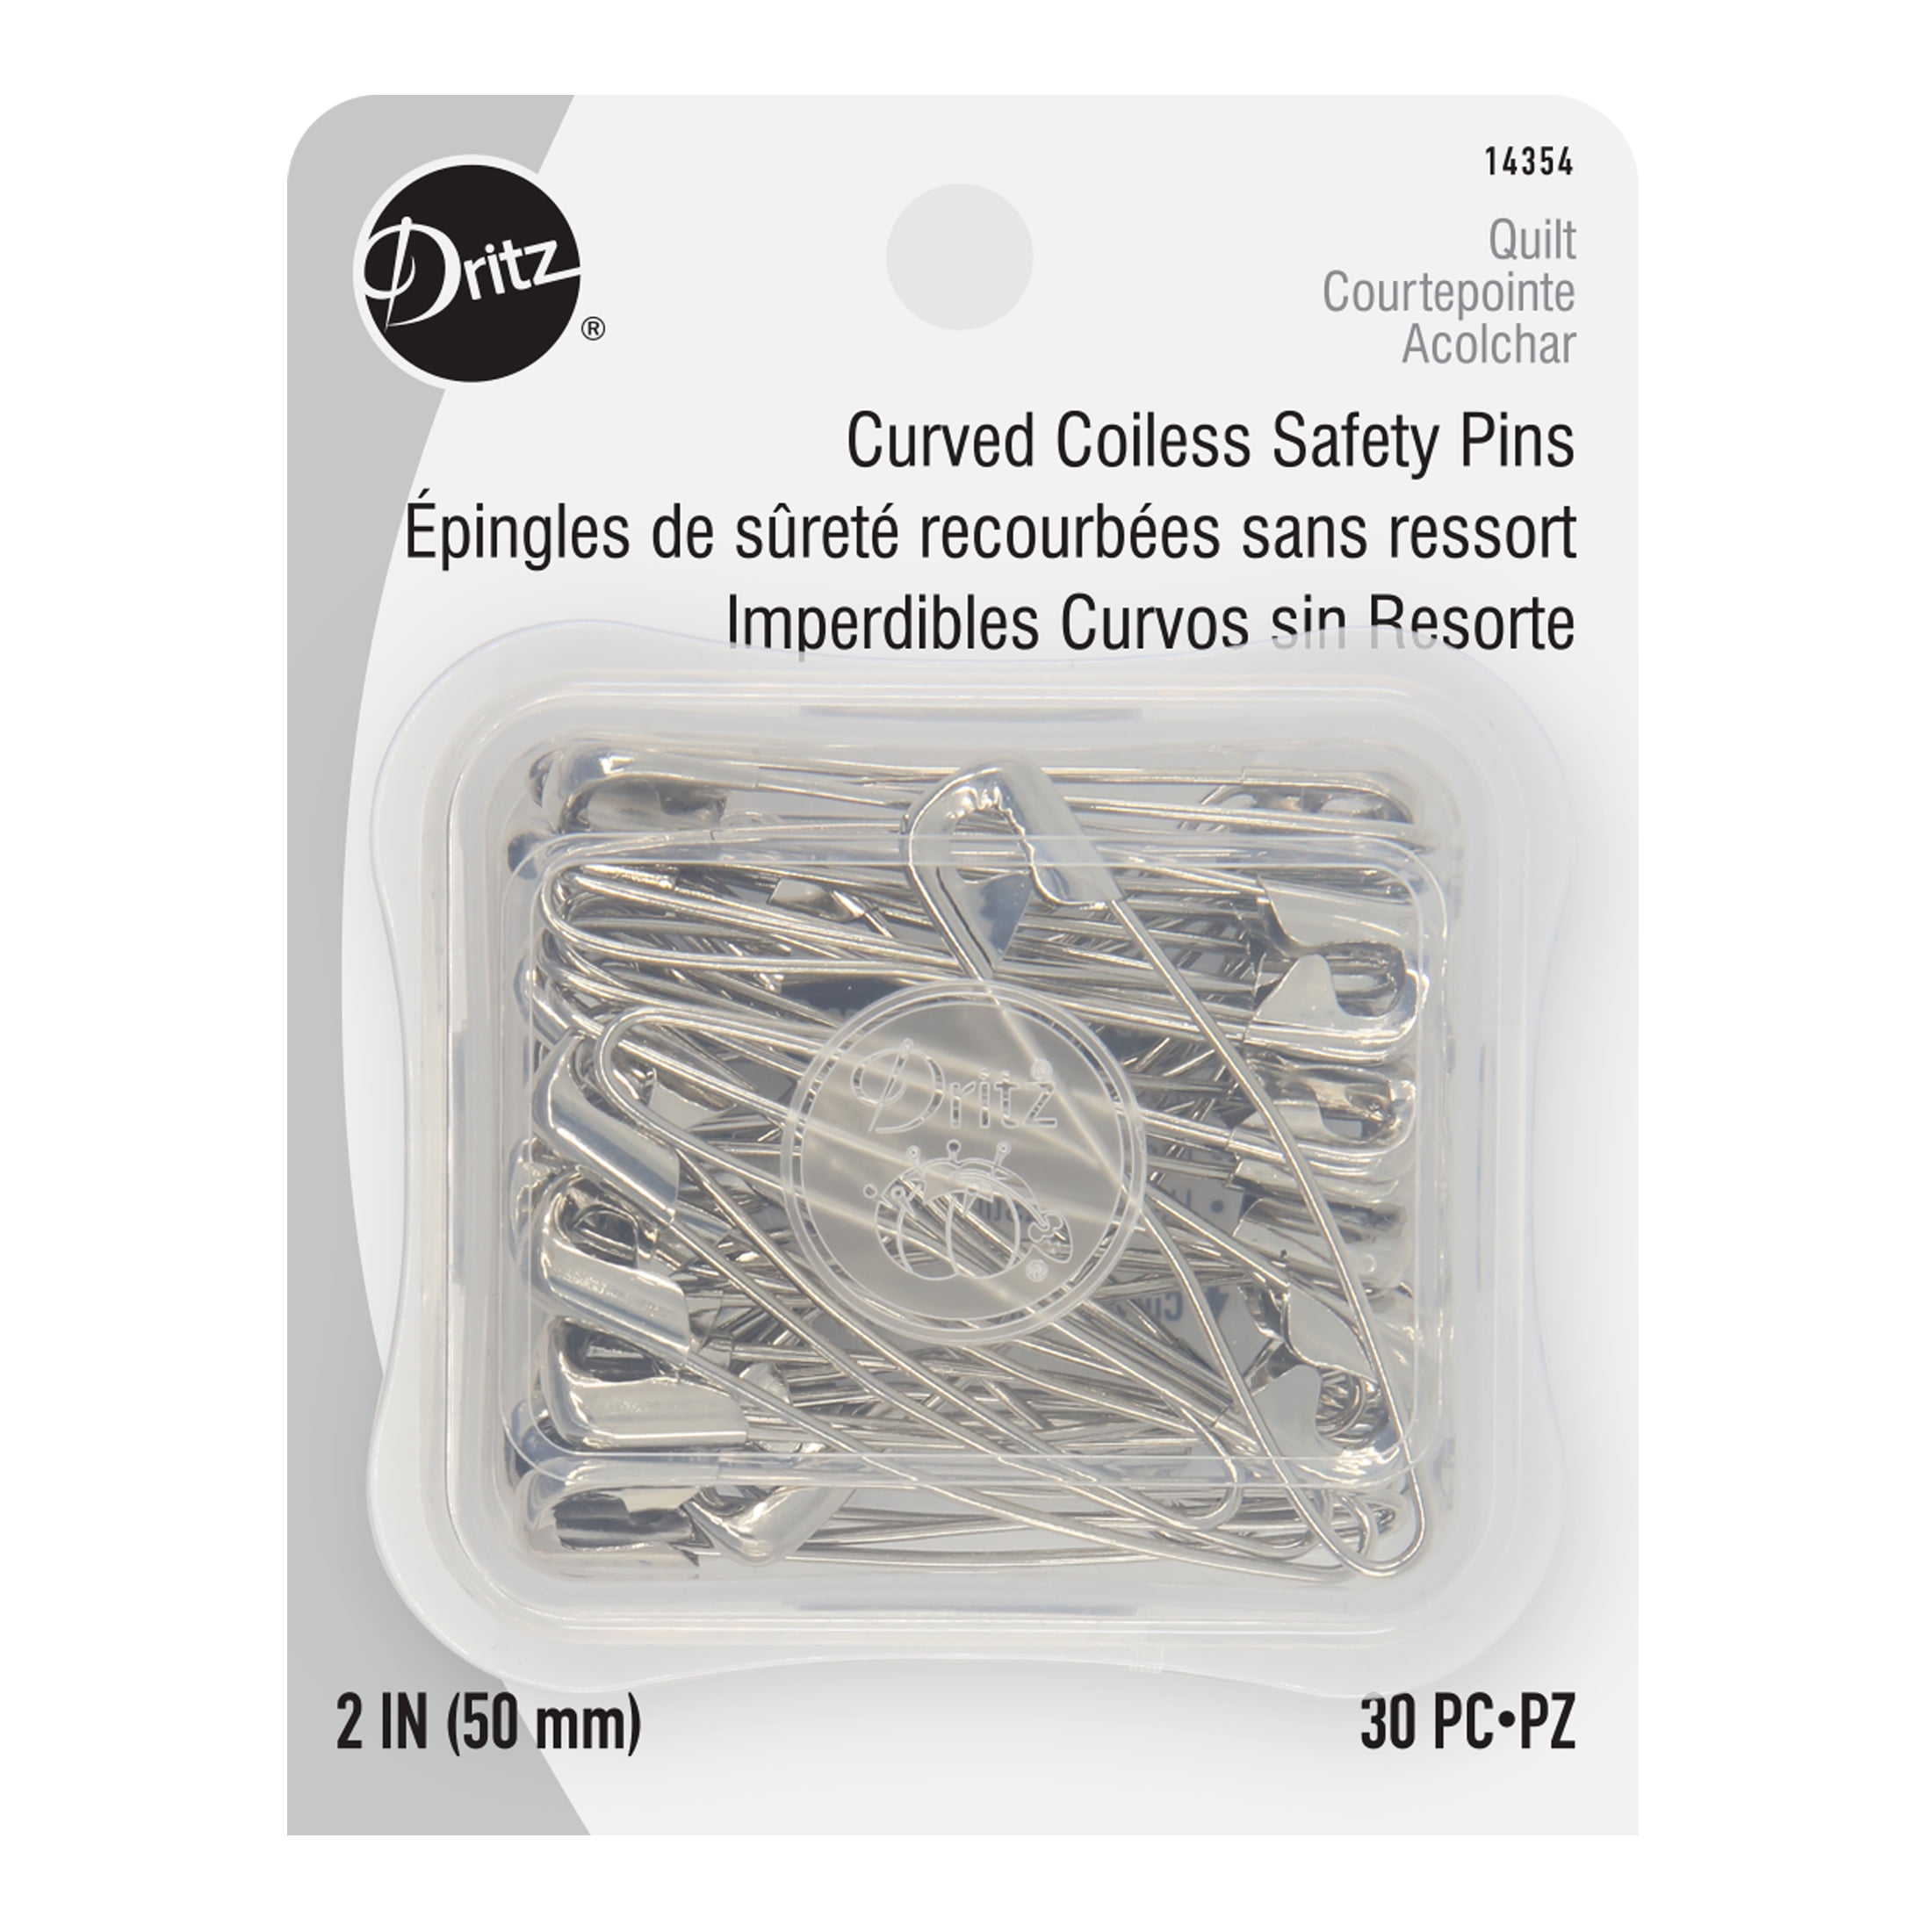  Cionyce 120 PCS Quilting Pins 1.5 / 38mm Curved Safety Pins  Size 2 Basting Pins Nickel-Plated Steel(#2)